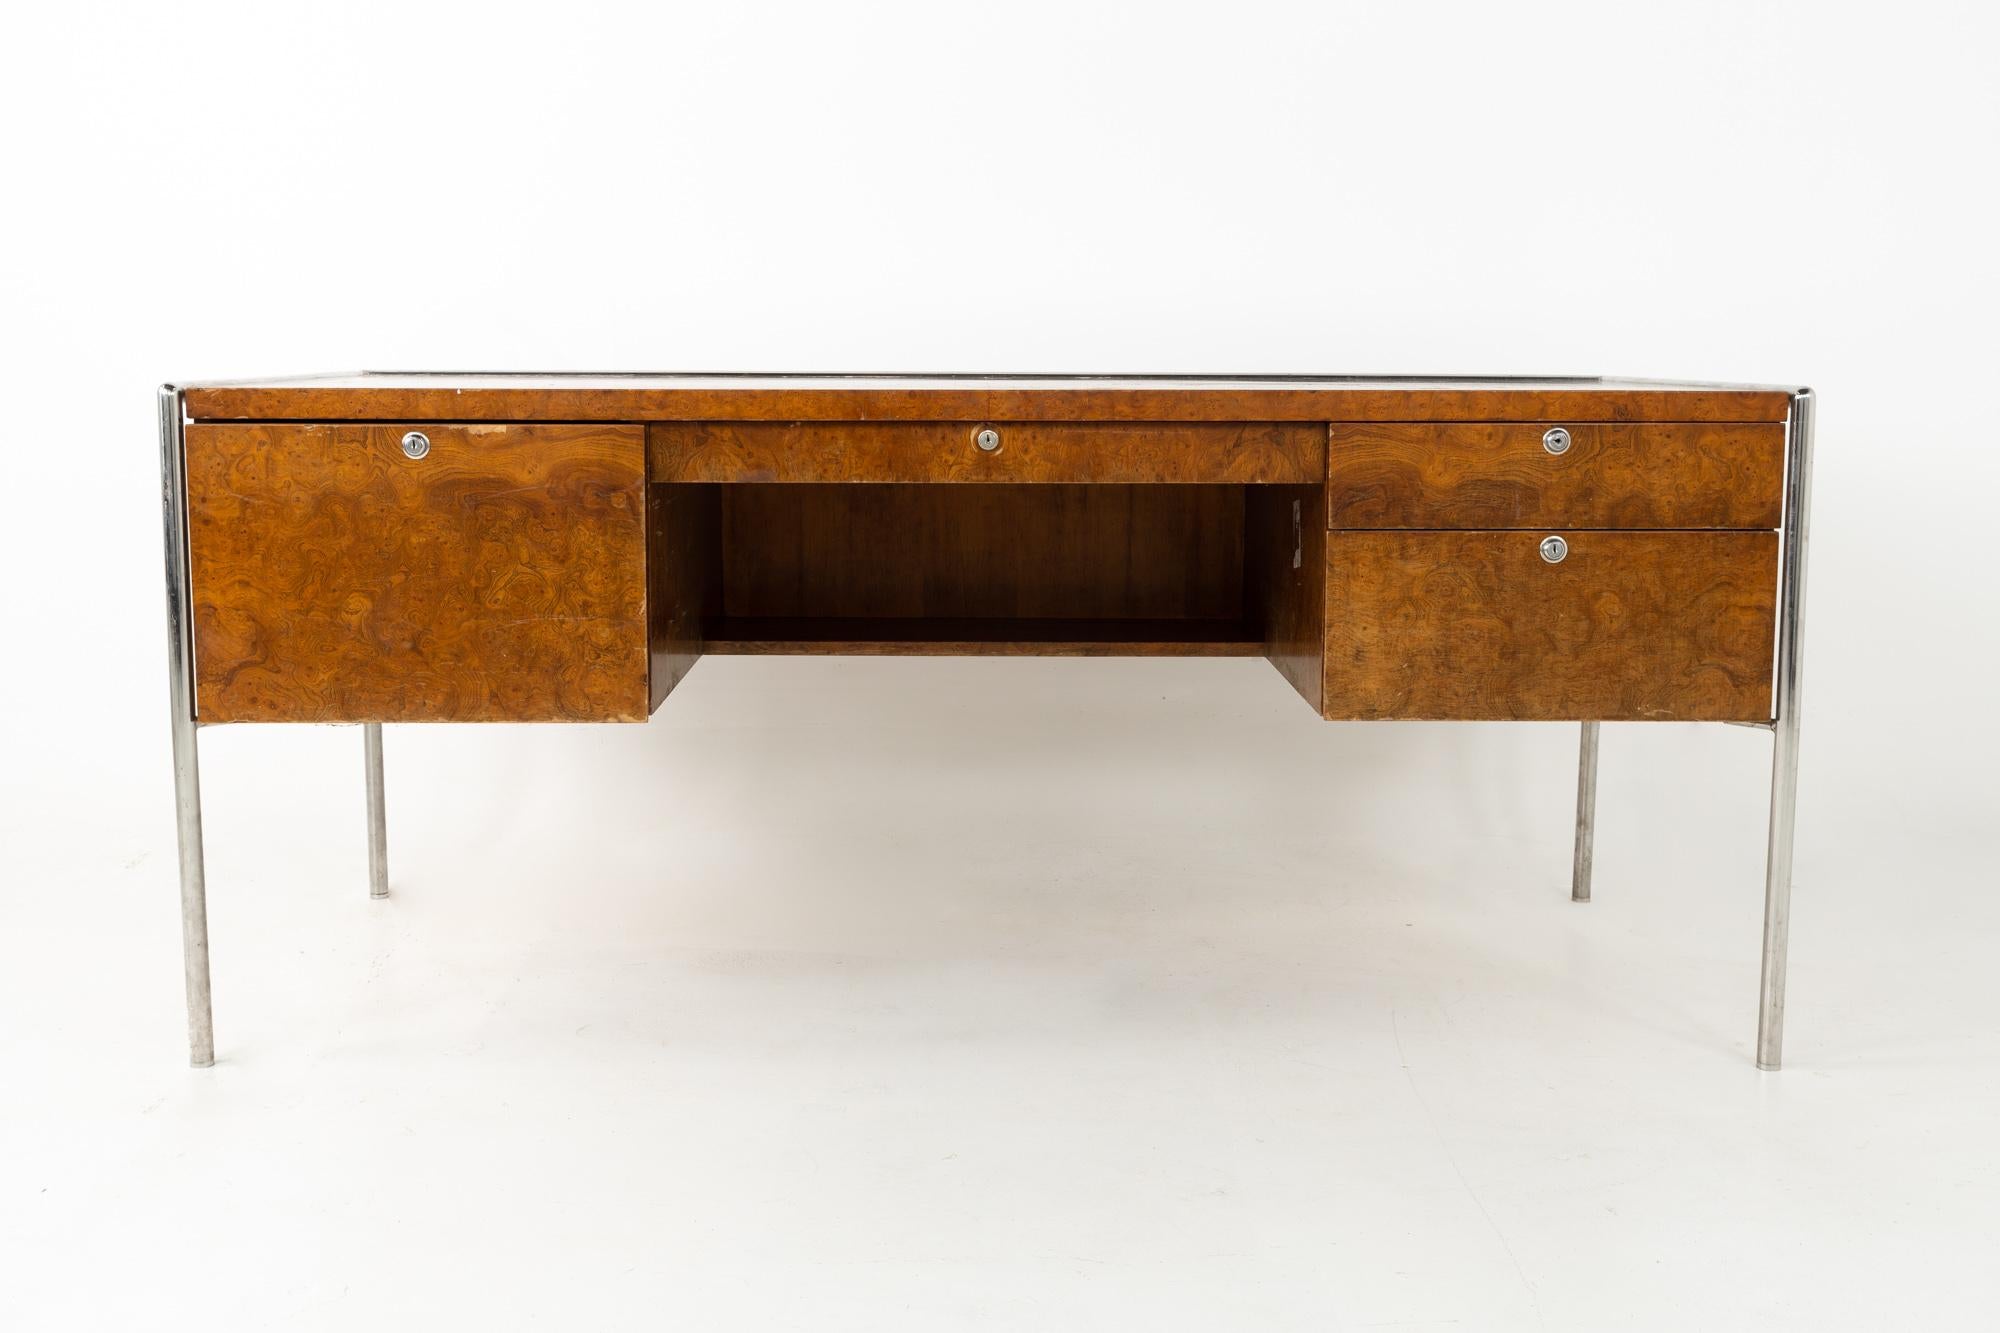 Milo Baughman style Mid Century burl wood and chrome executive desk.
This desk is 68 wide x 29.75 deep x 28.75 inches high

All pieces of furniture can be had in what we call restored vintage condition. This means the piece is restored upon purchase